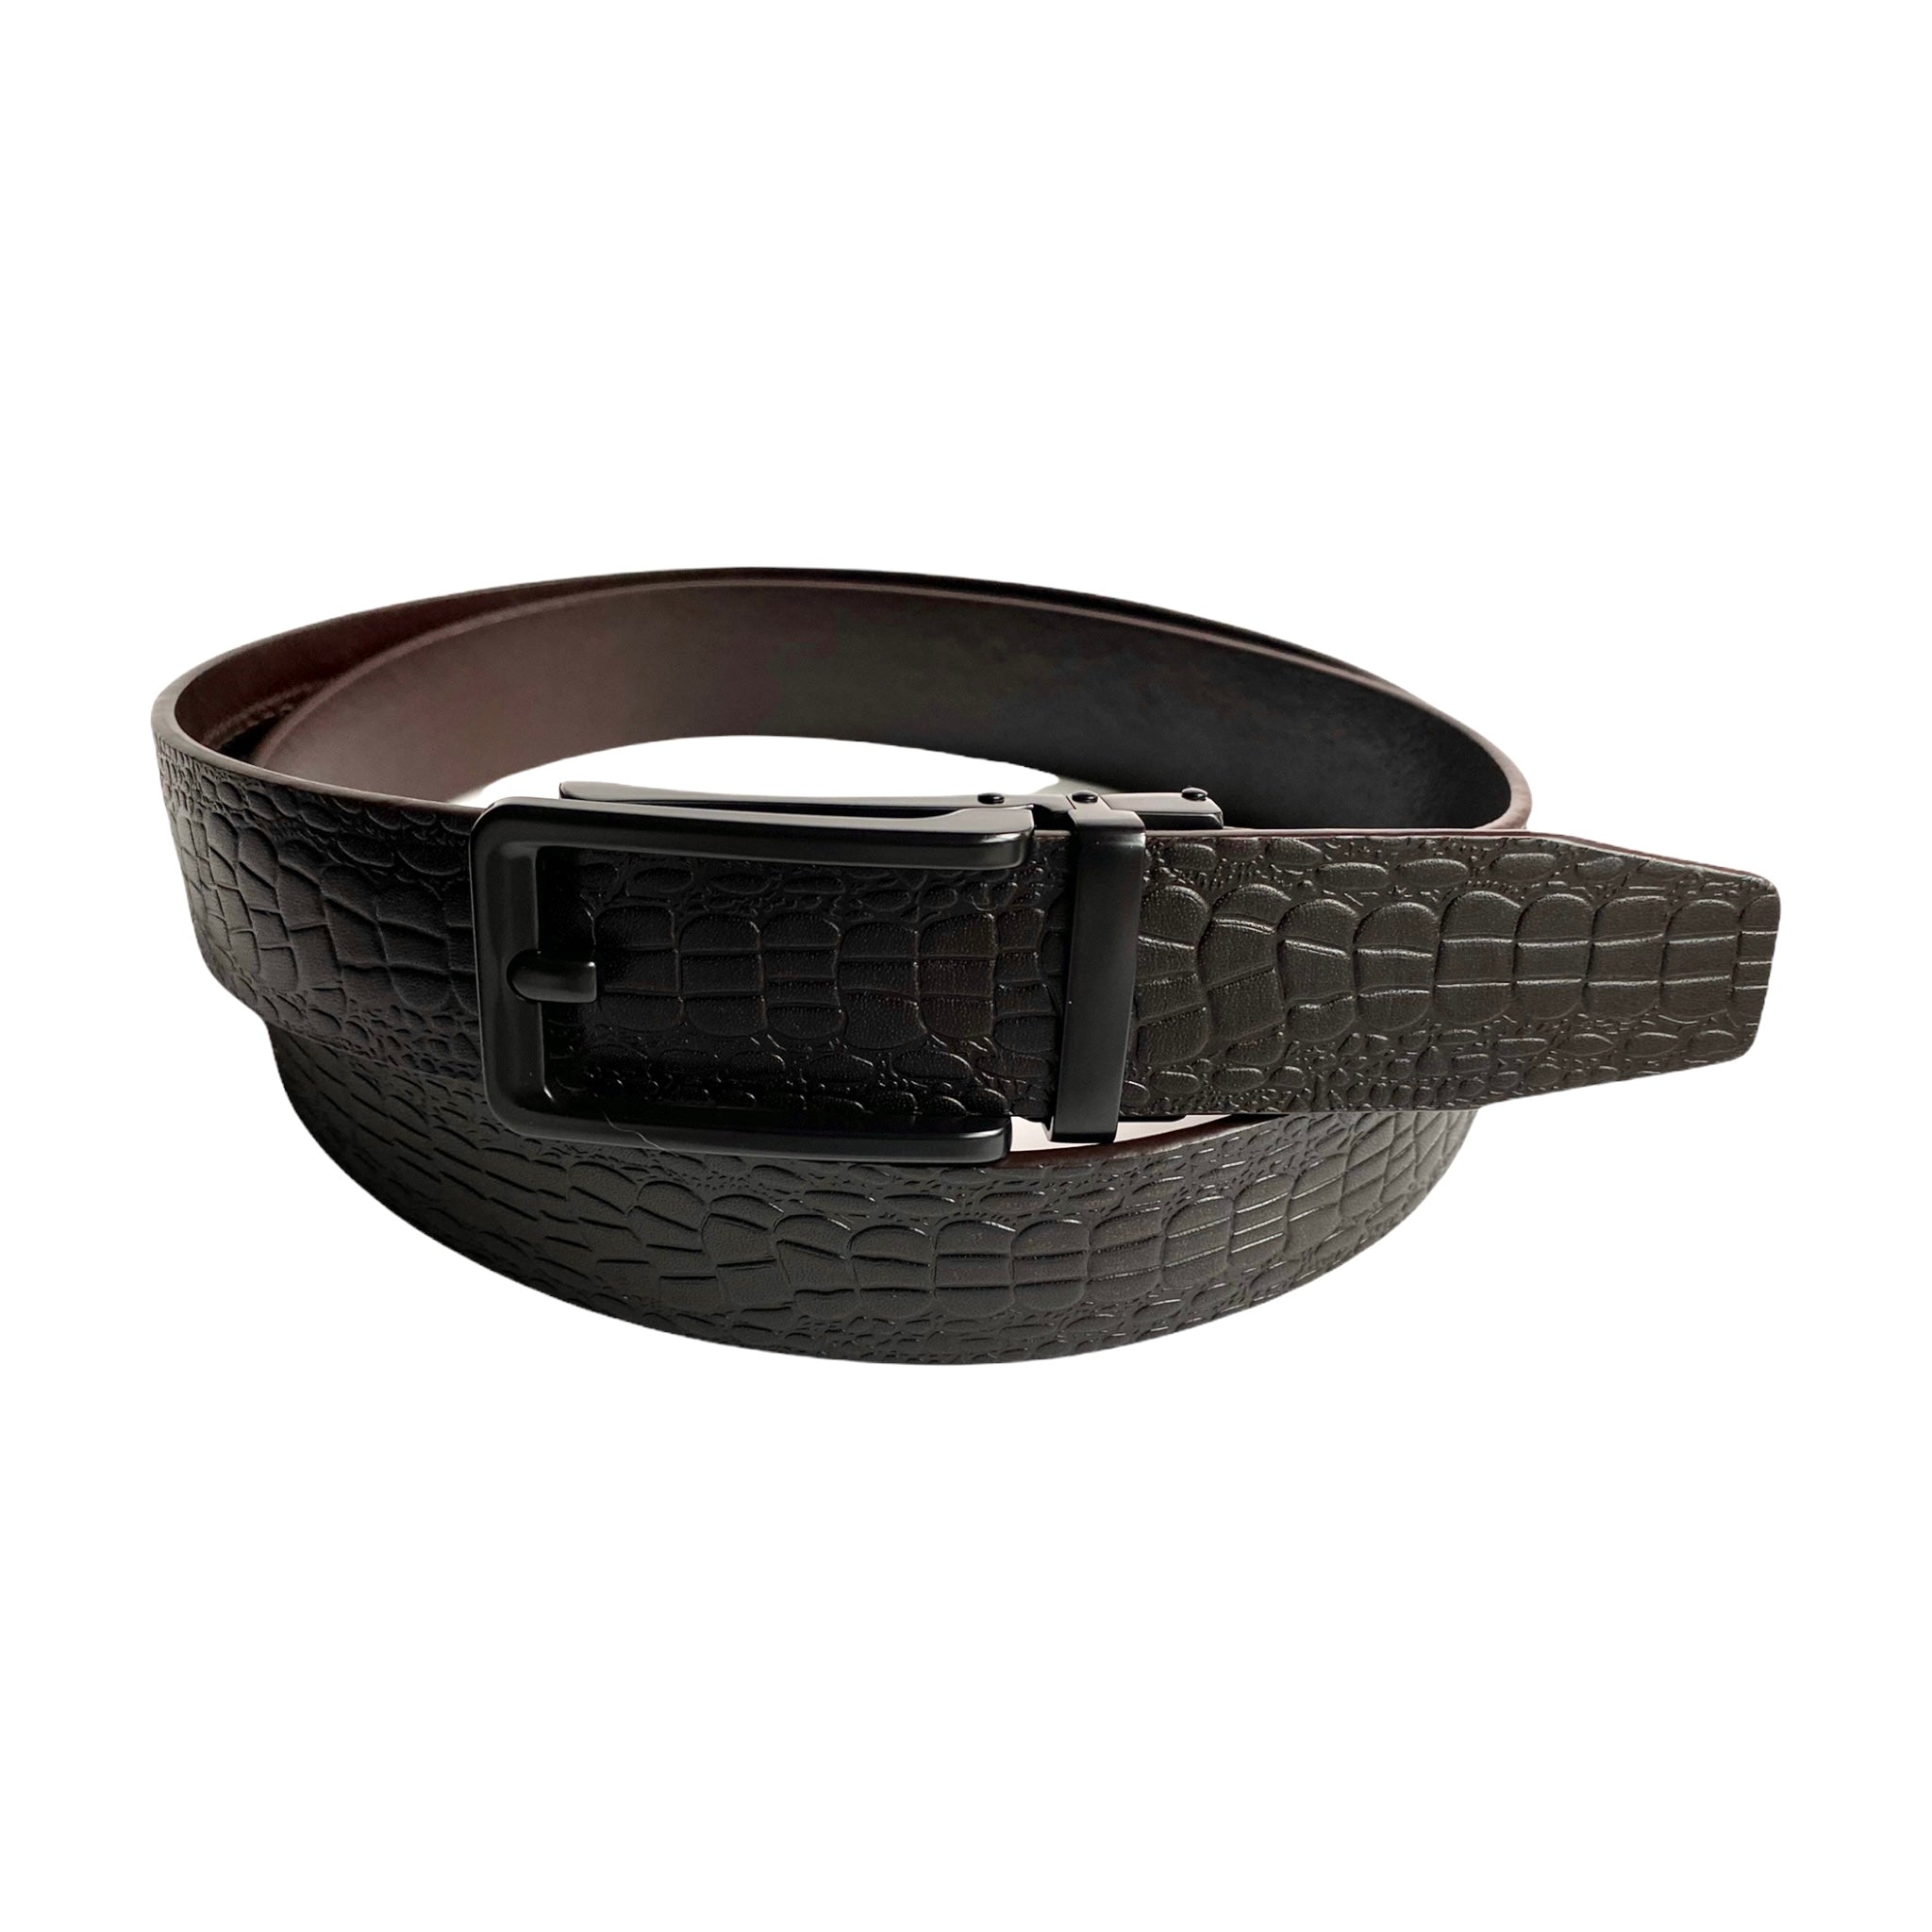 1.38" Genuine Leather Dark Brown Textured Strap And 1.38" Automatic Buckle Black Hollow